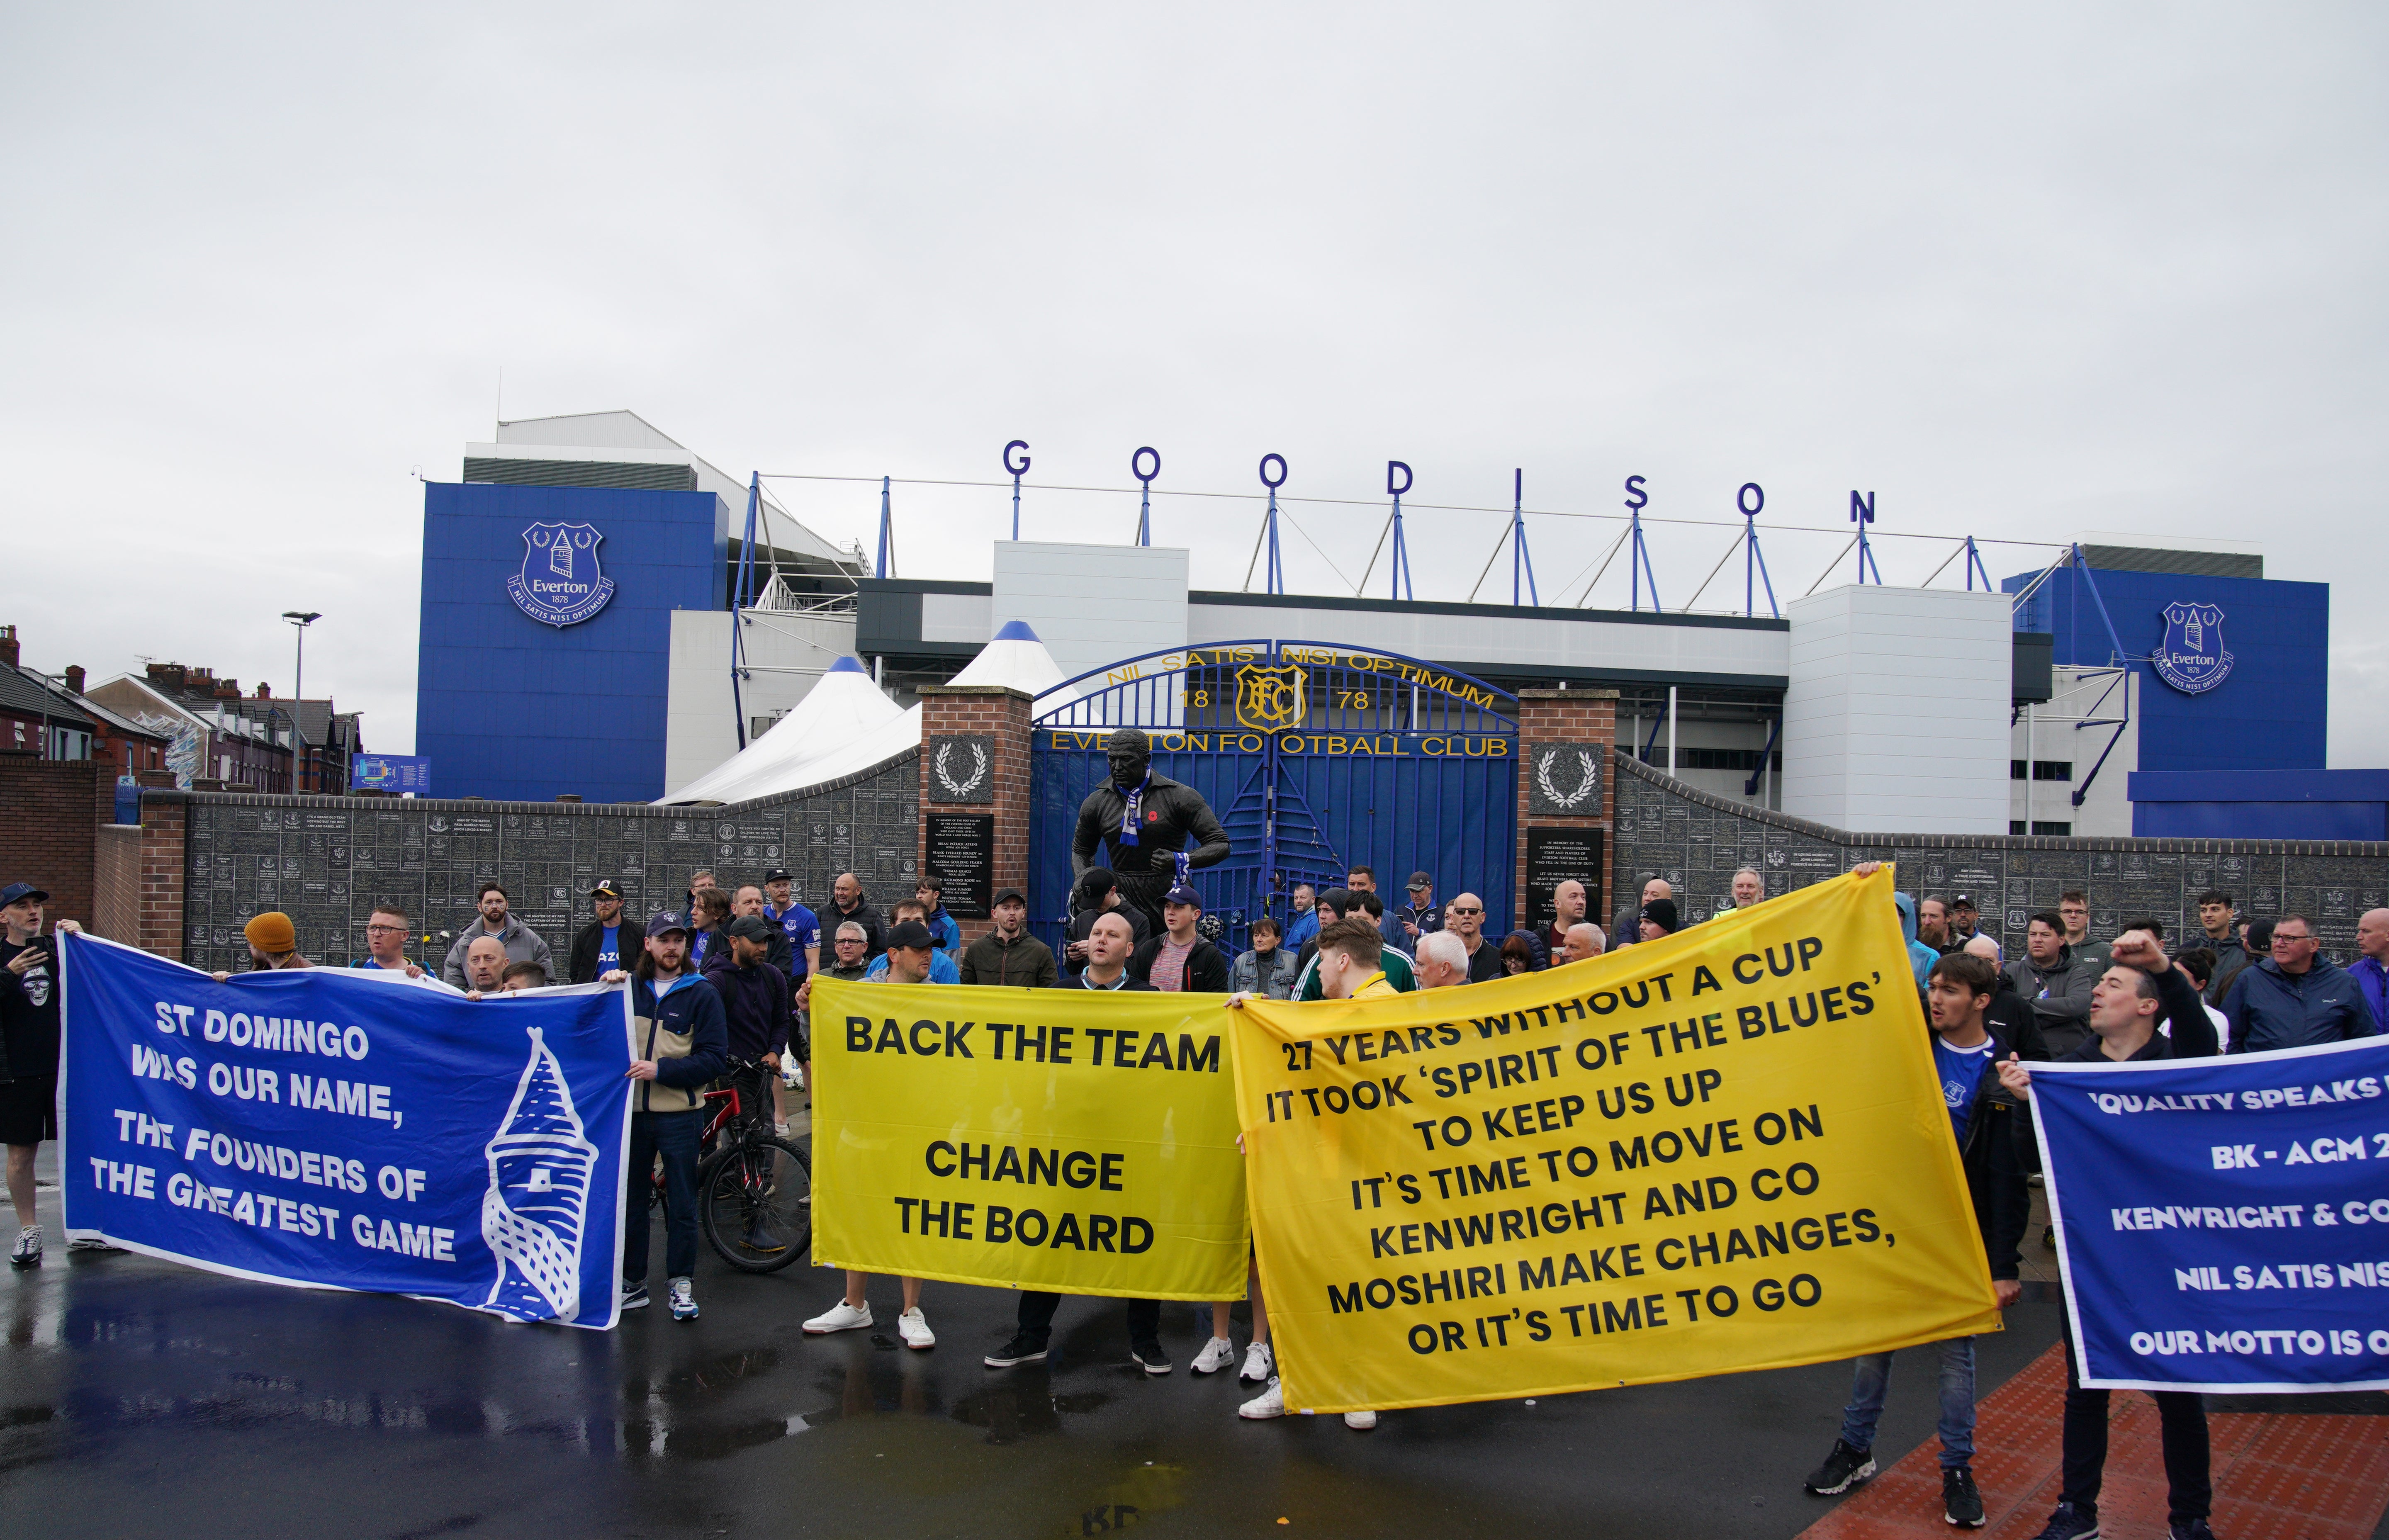 Everton fans staged a protest outside Goodison Park to complain about leadership issues within the club (Peter Byrne/PA)